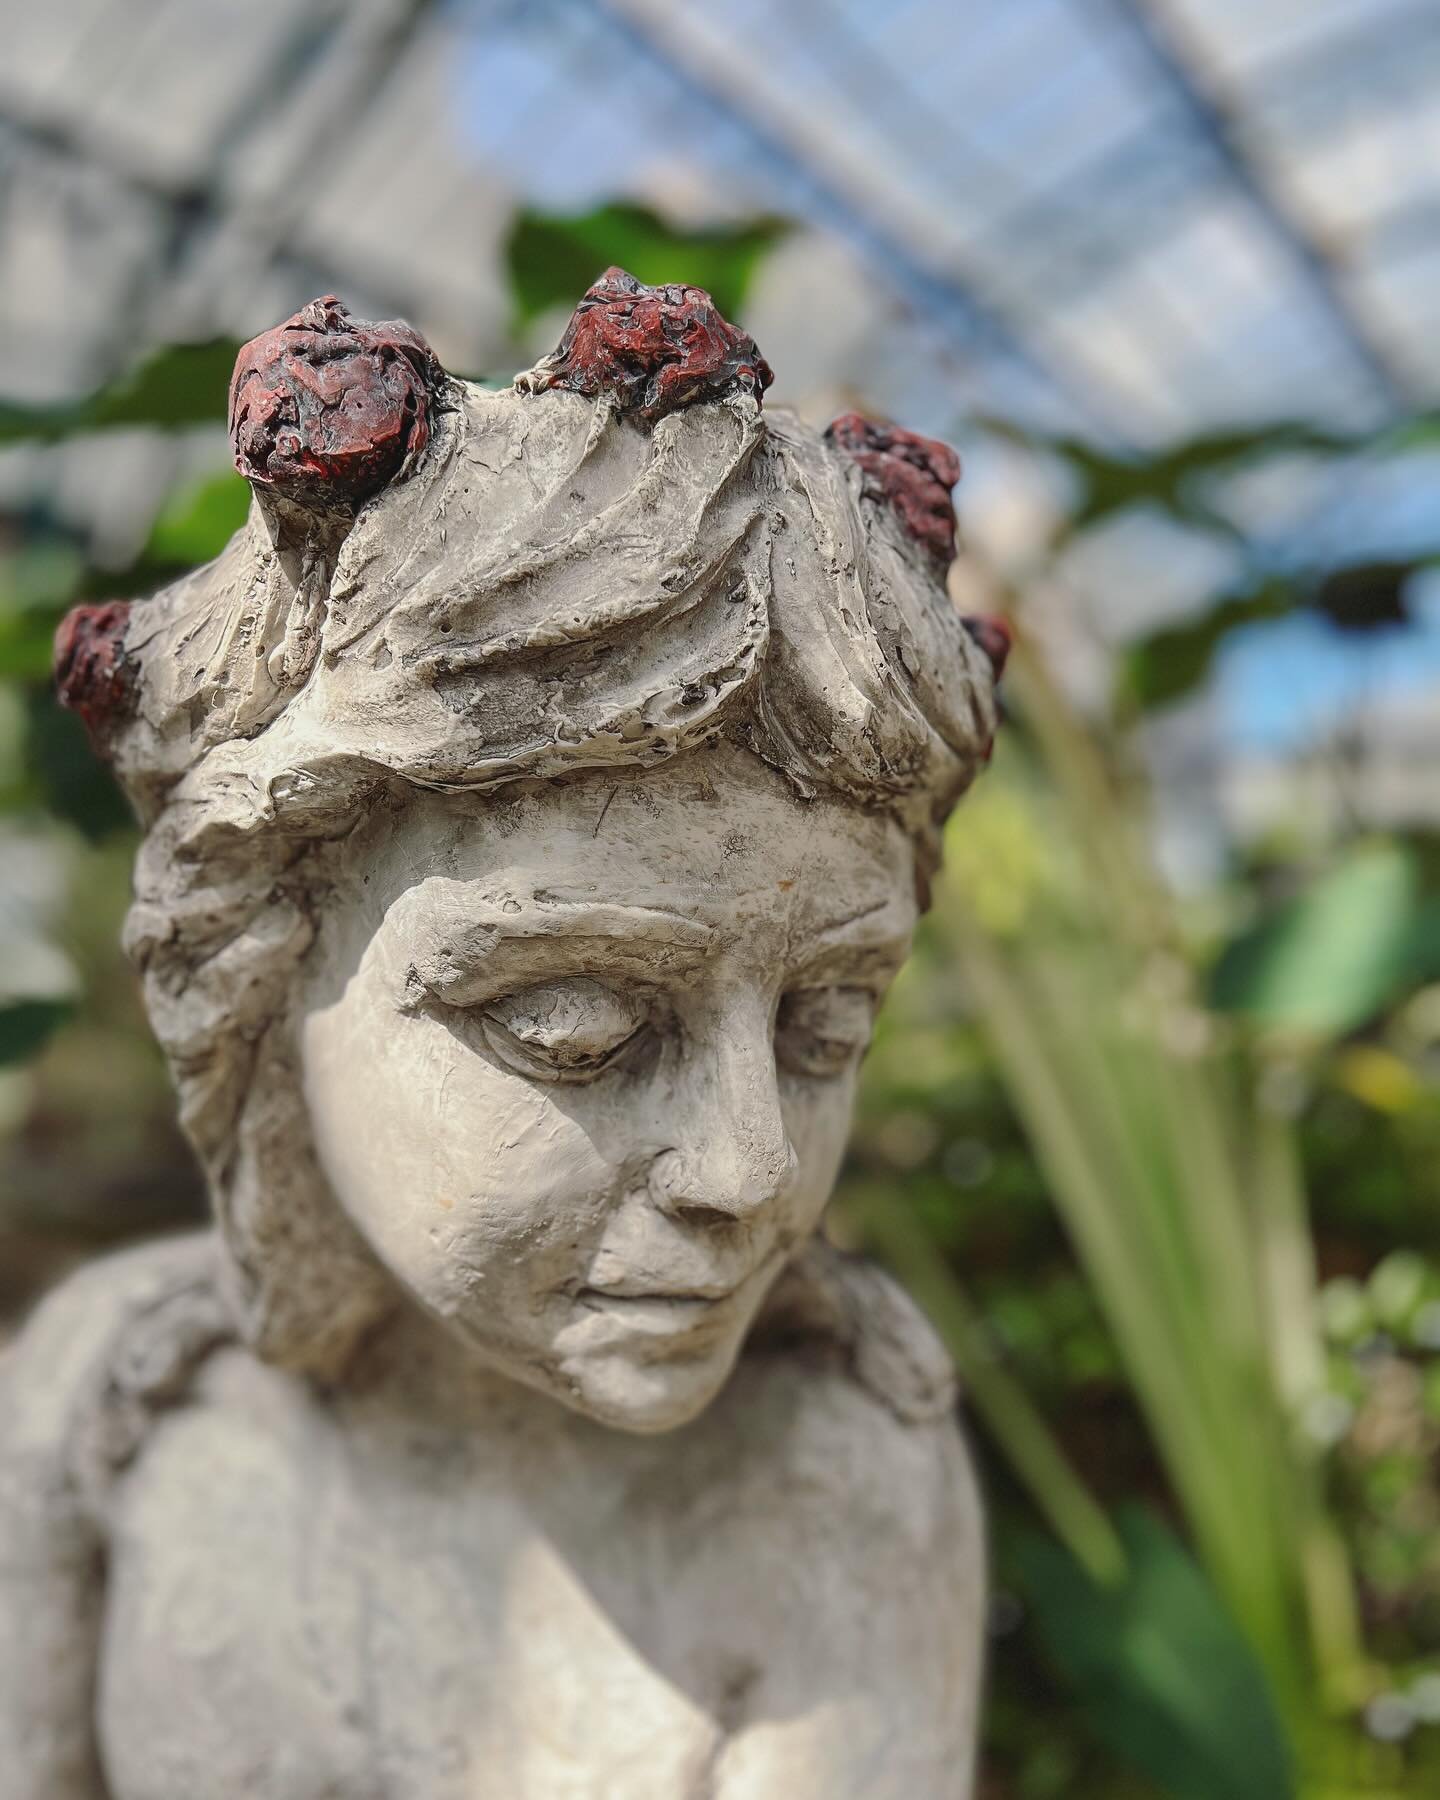 Entering into this greenhouse in the Palermo Botanical Garden felt like stepping into a novel. Oh, the wild tangle of plants - not completely neglected and not yet tamed! The space absolutely fit this sweet statue of a little girl hanging out with he